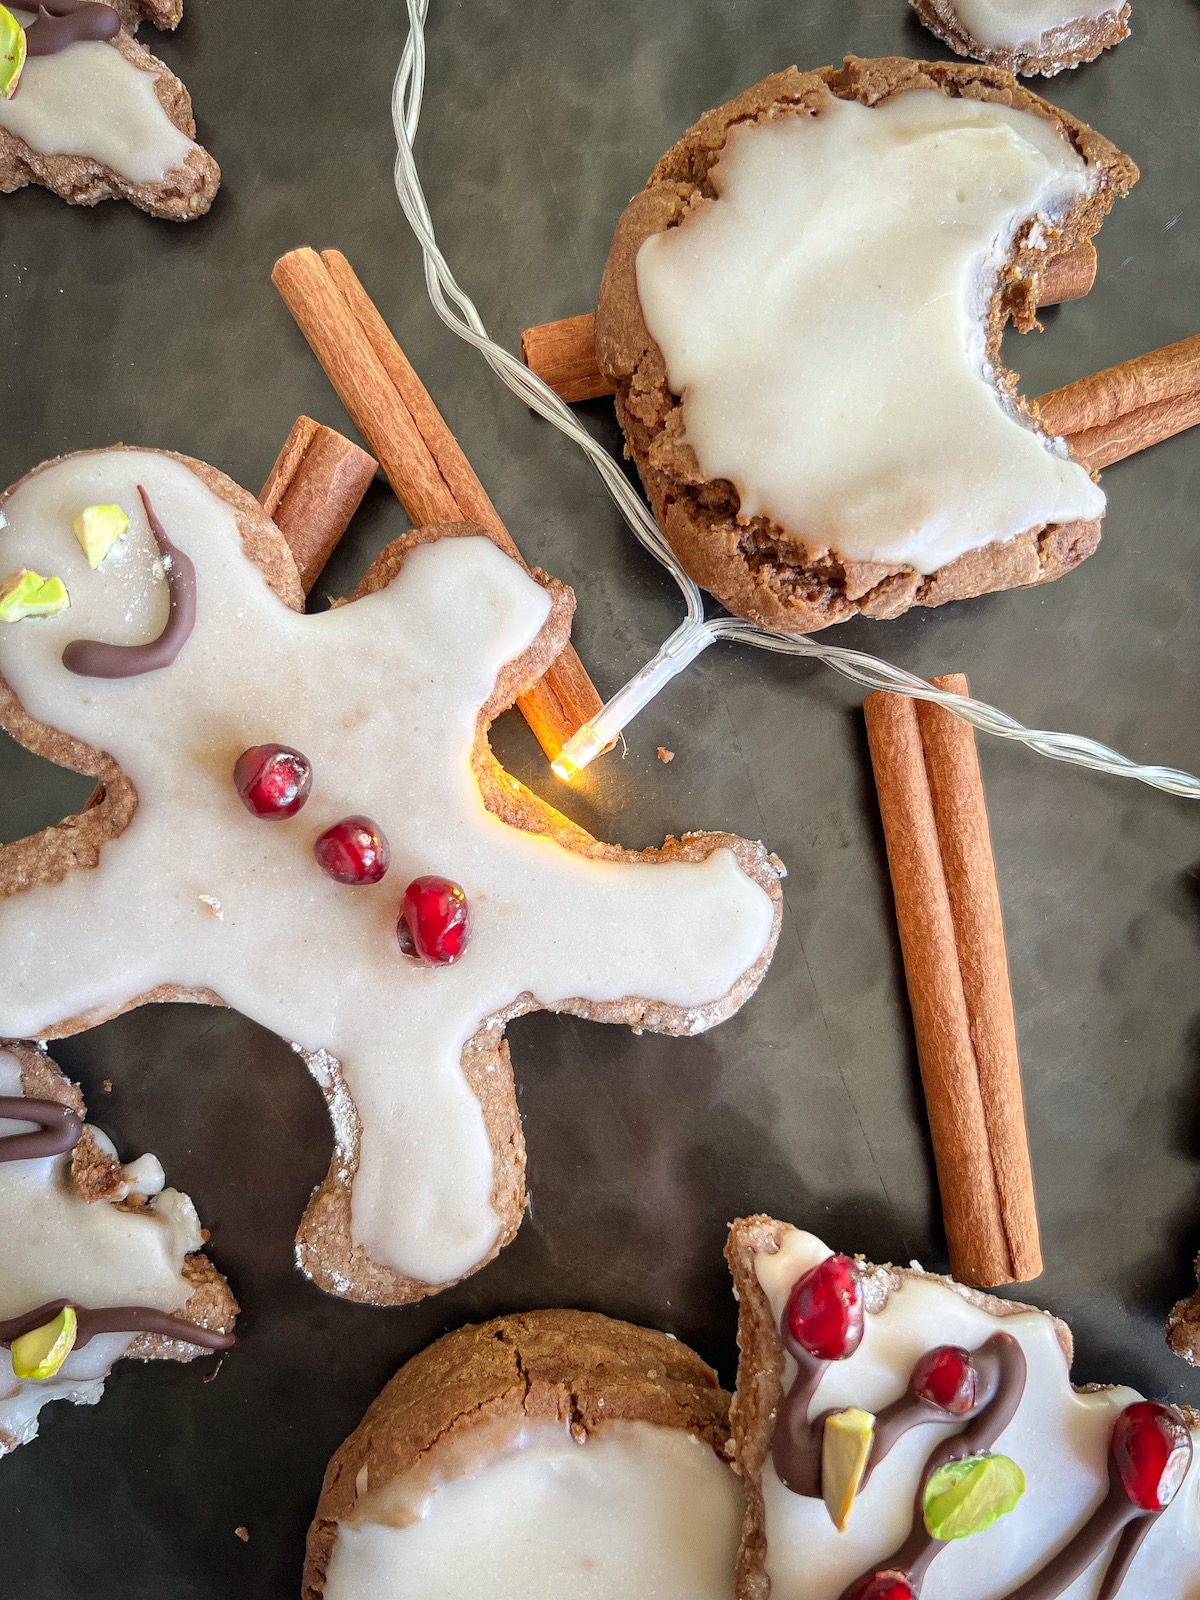 assorted gingerbread cookies on a tray with cinnamon sticks and string lights